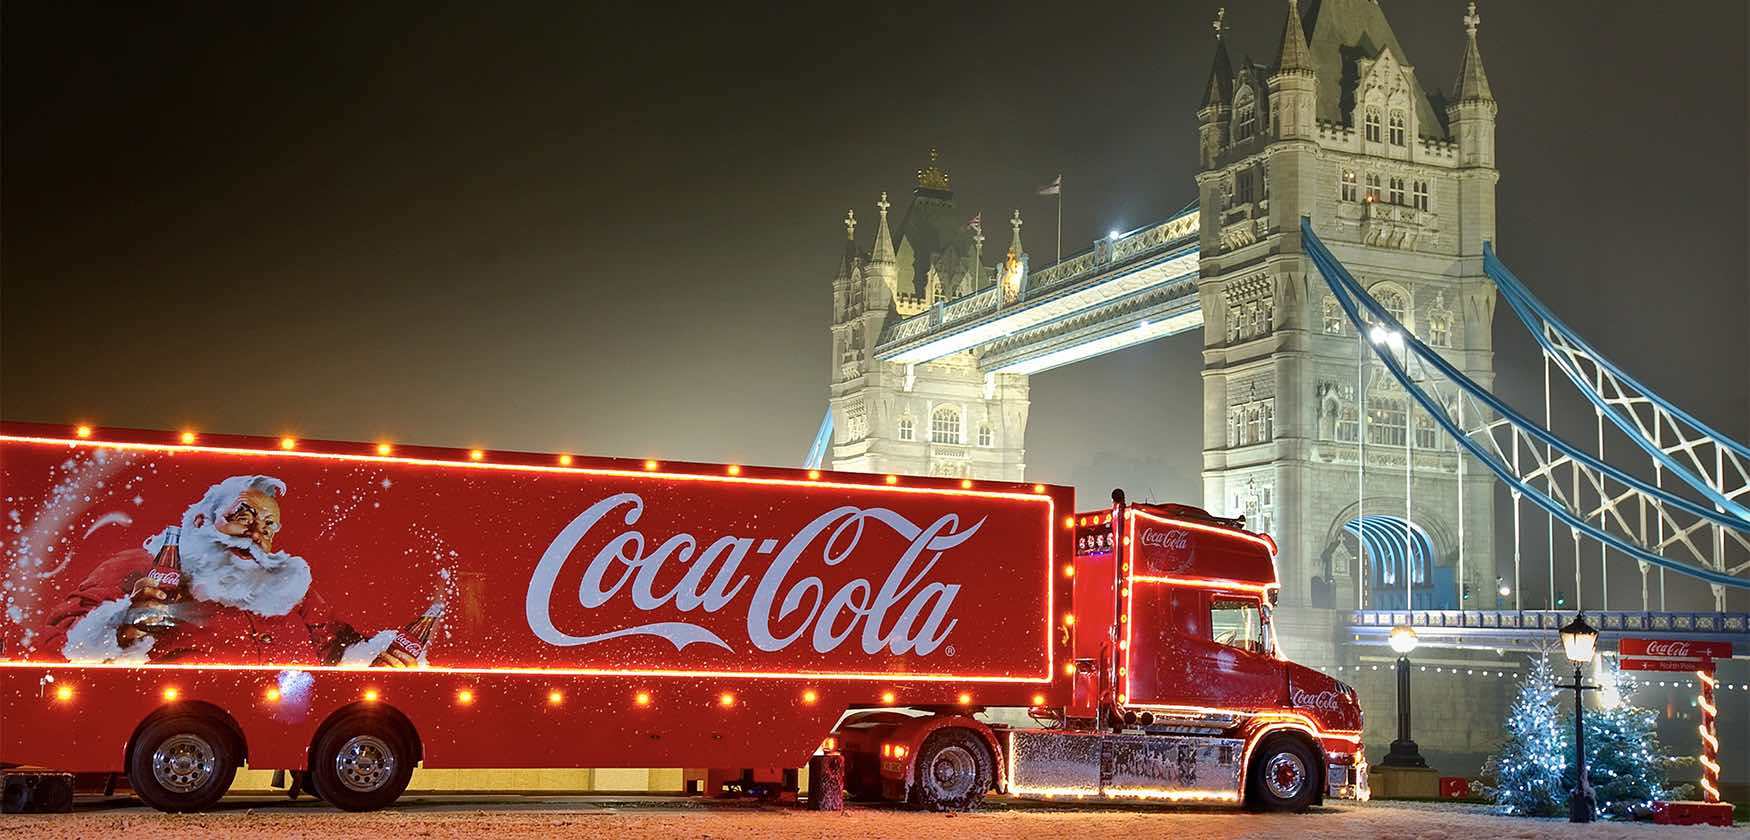 image of london bridge with large red coca cola truck and image of santa